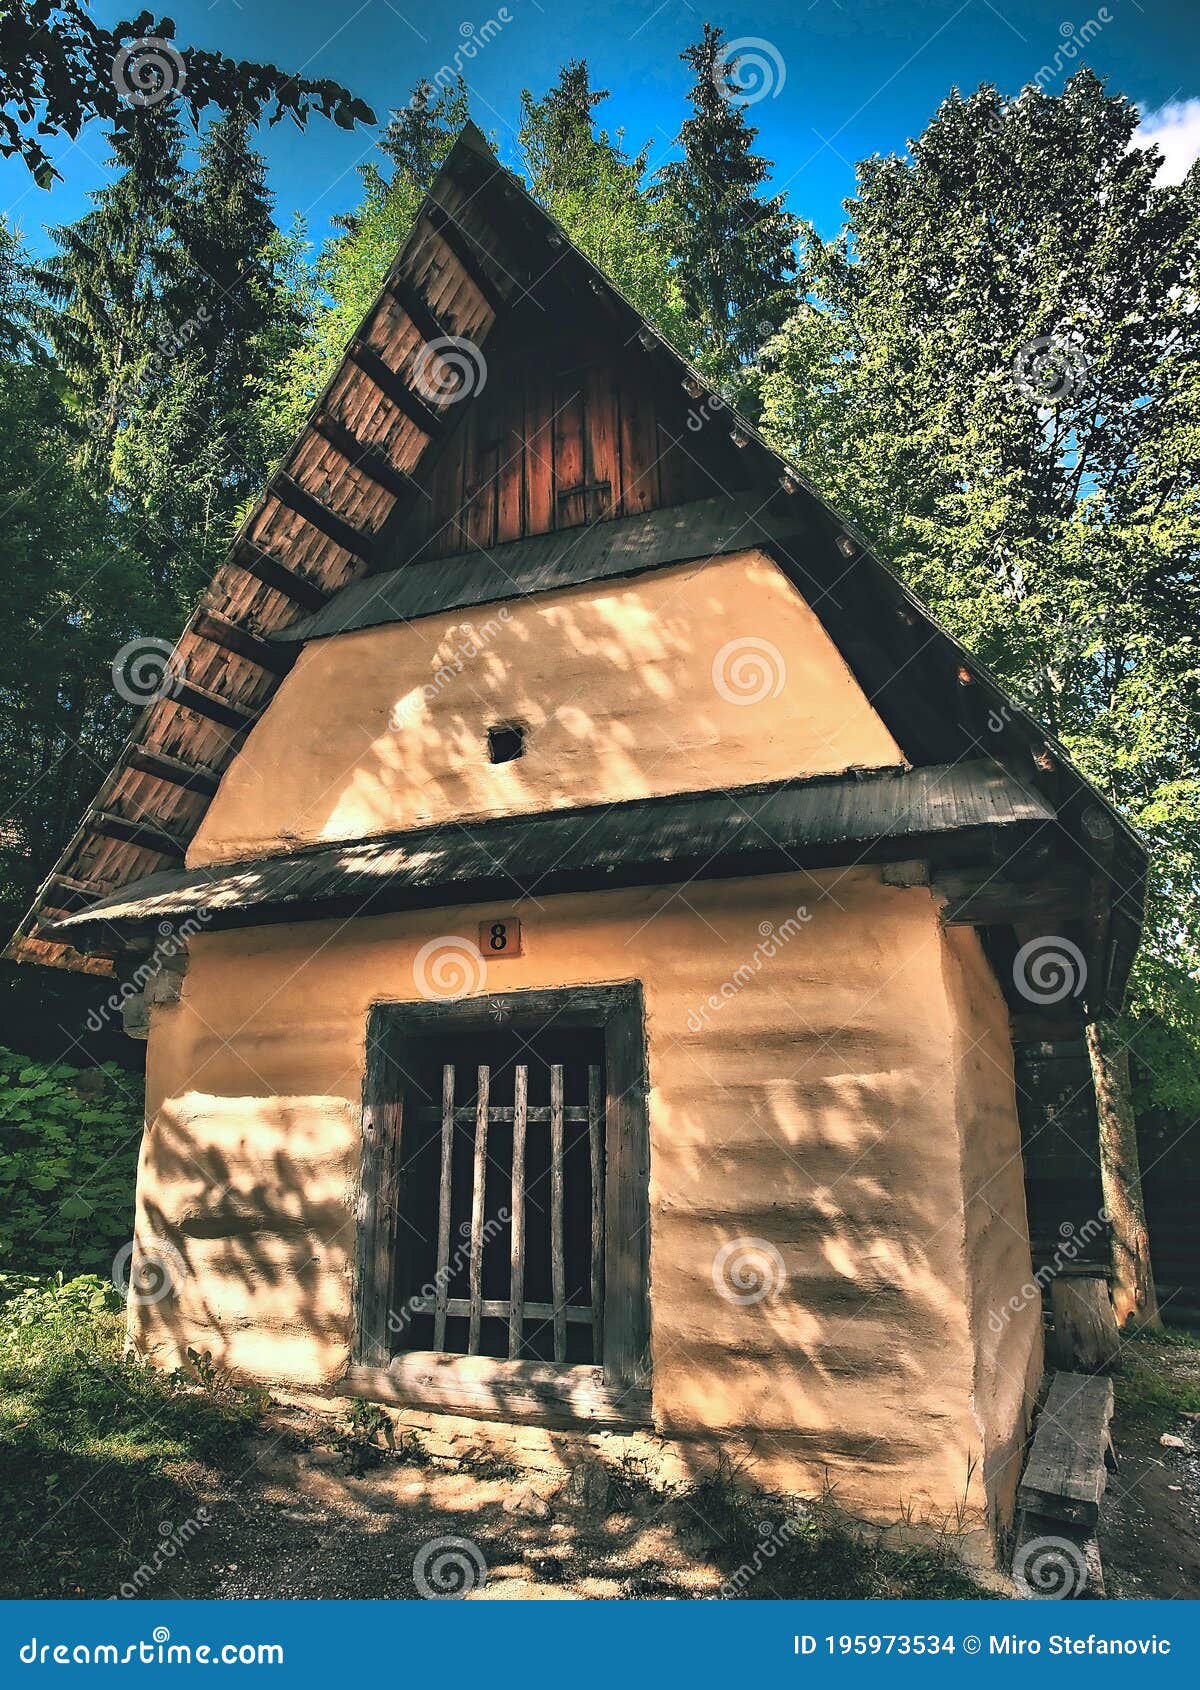 beautifully old wooden houses in beautiful nature full of trees and flowers.slovakia